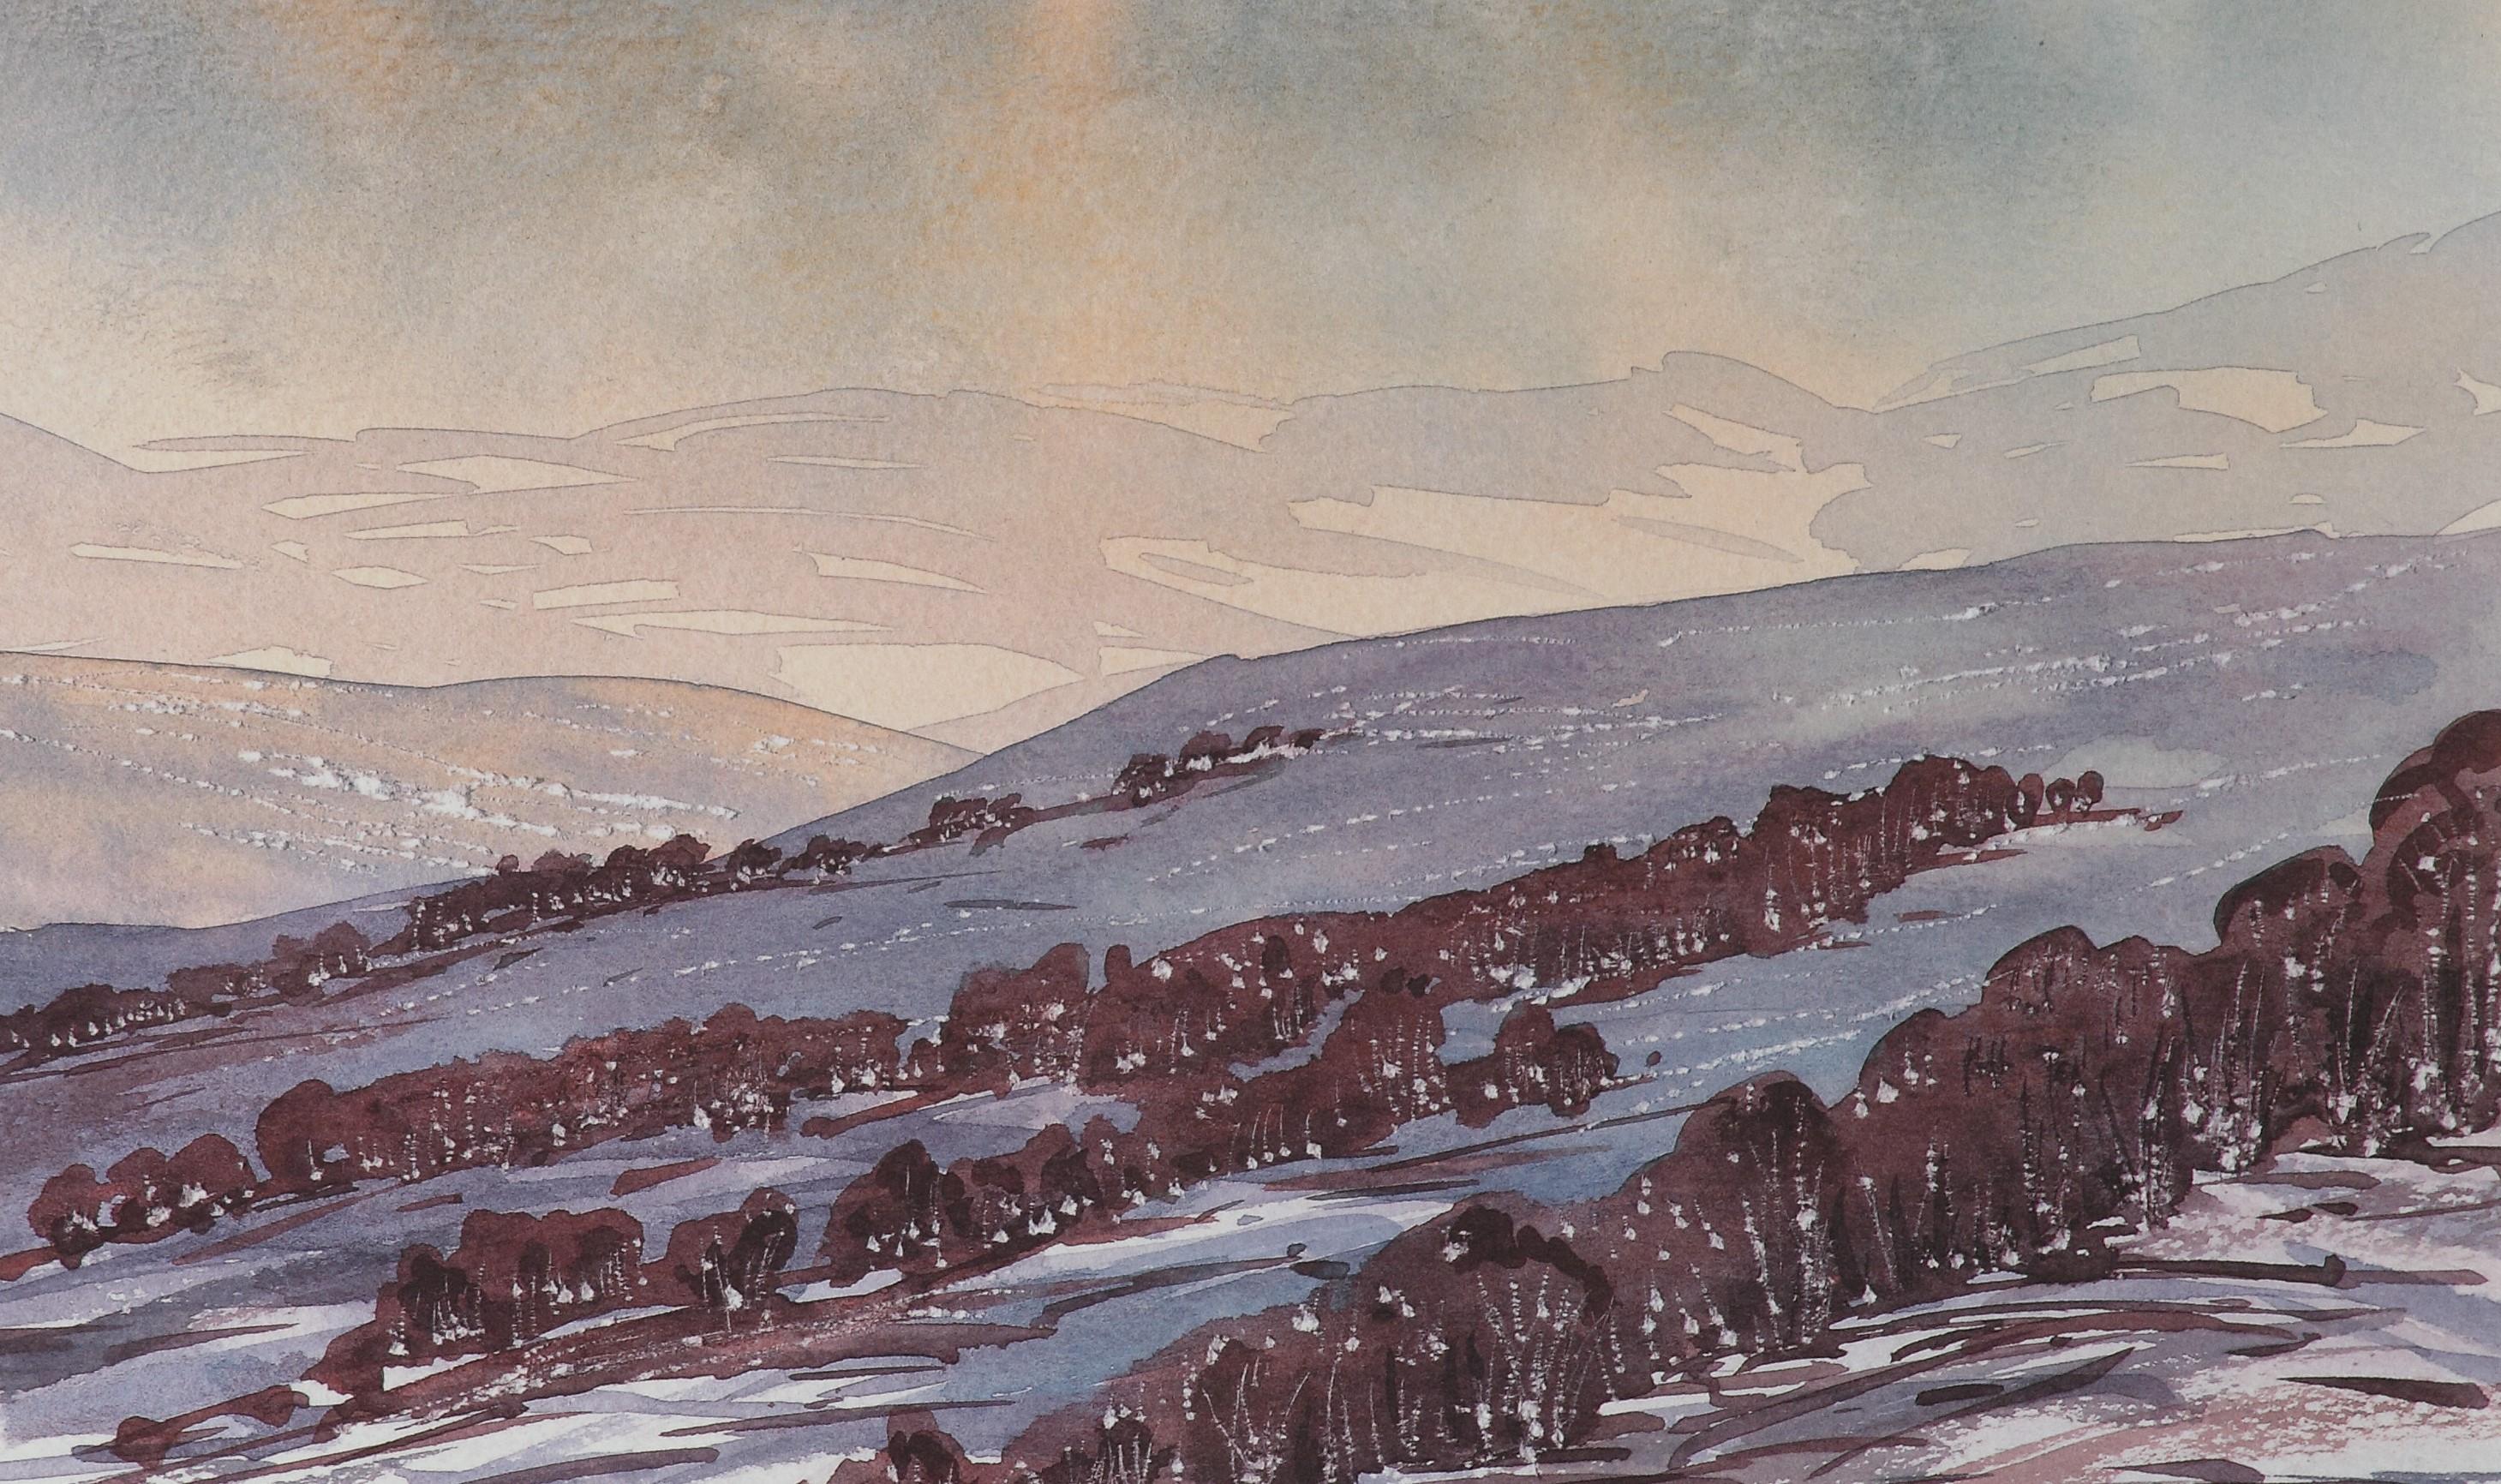 Glengairn, Aberdeenshire - Signed Lithograph, Royal Art, Scotland, British - Academic Print by His Majesty King Charles III